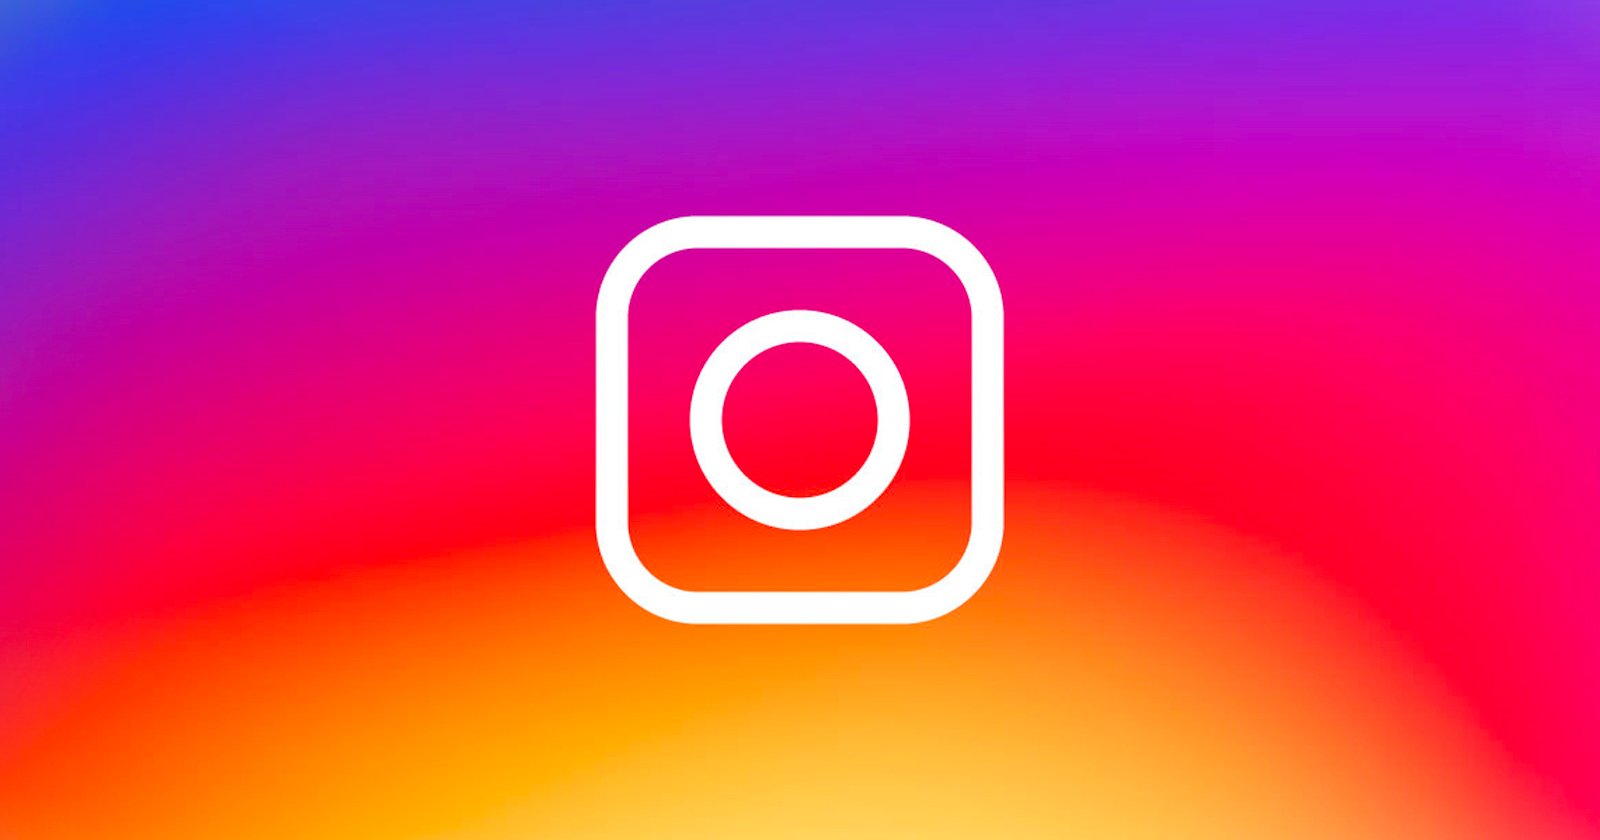 Instagram Users Can Now Prevent Others from Embedding Their Photos | PetaPixel